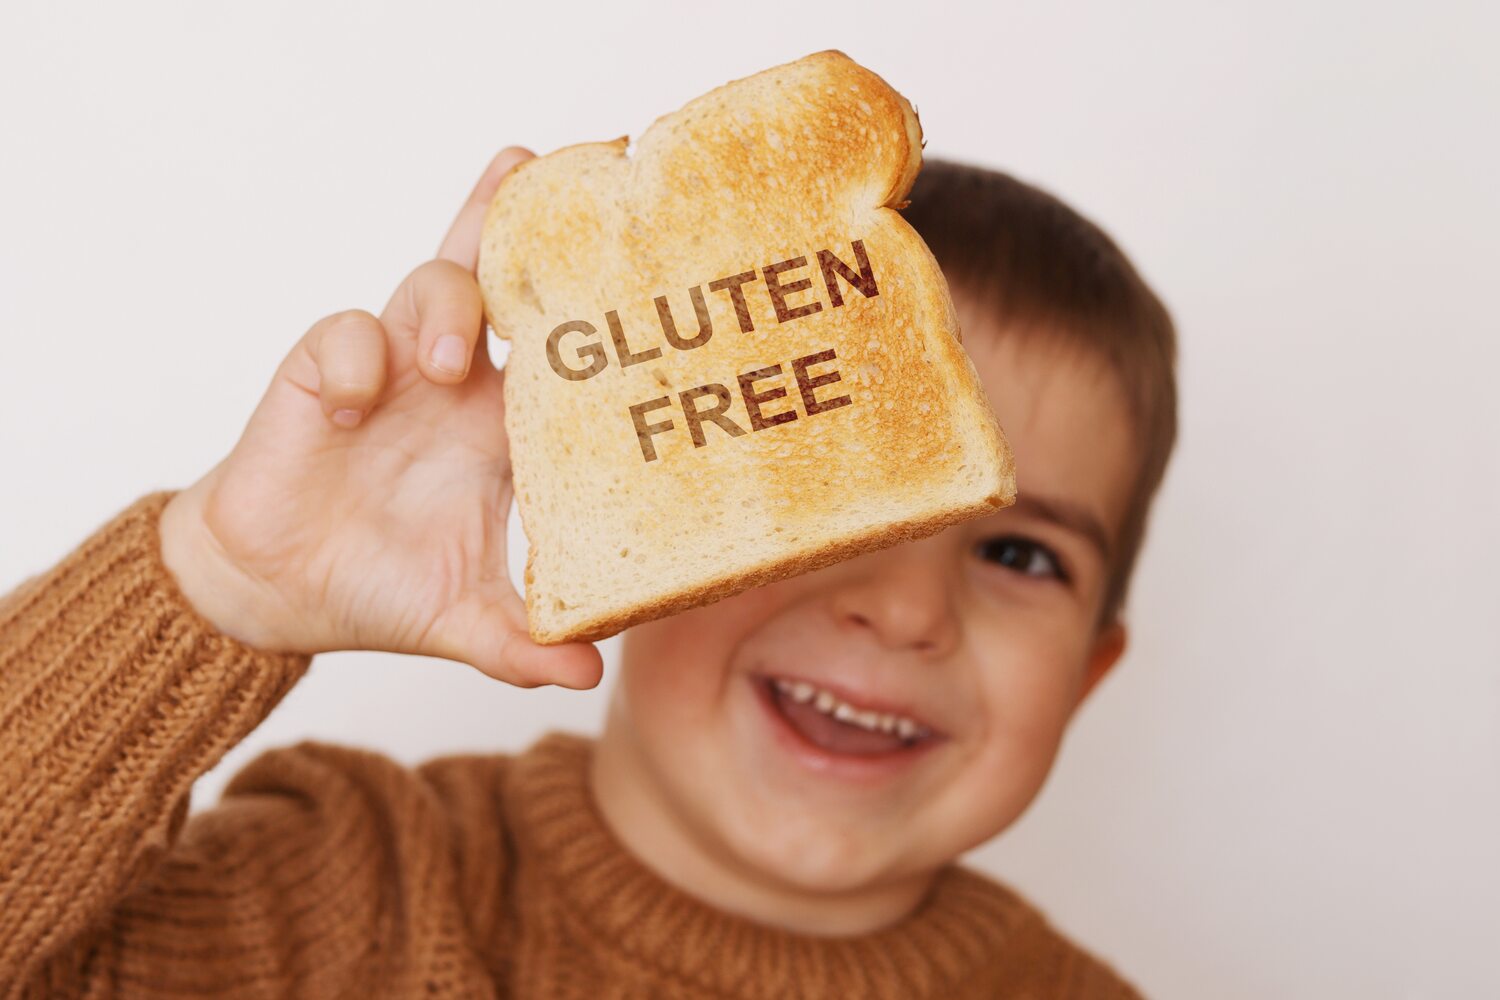 Some kids may get gluten allergy after consuming whole grains like wheat